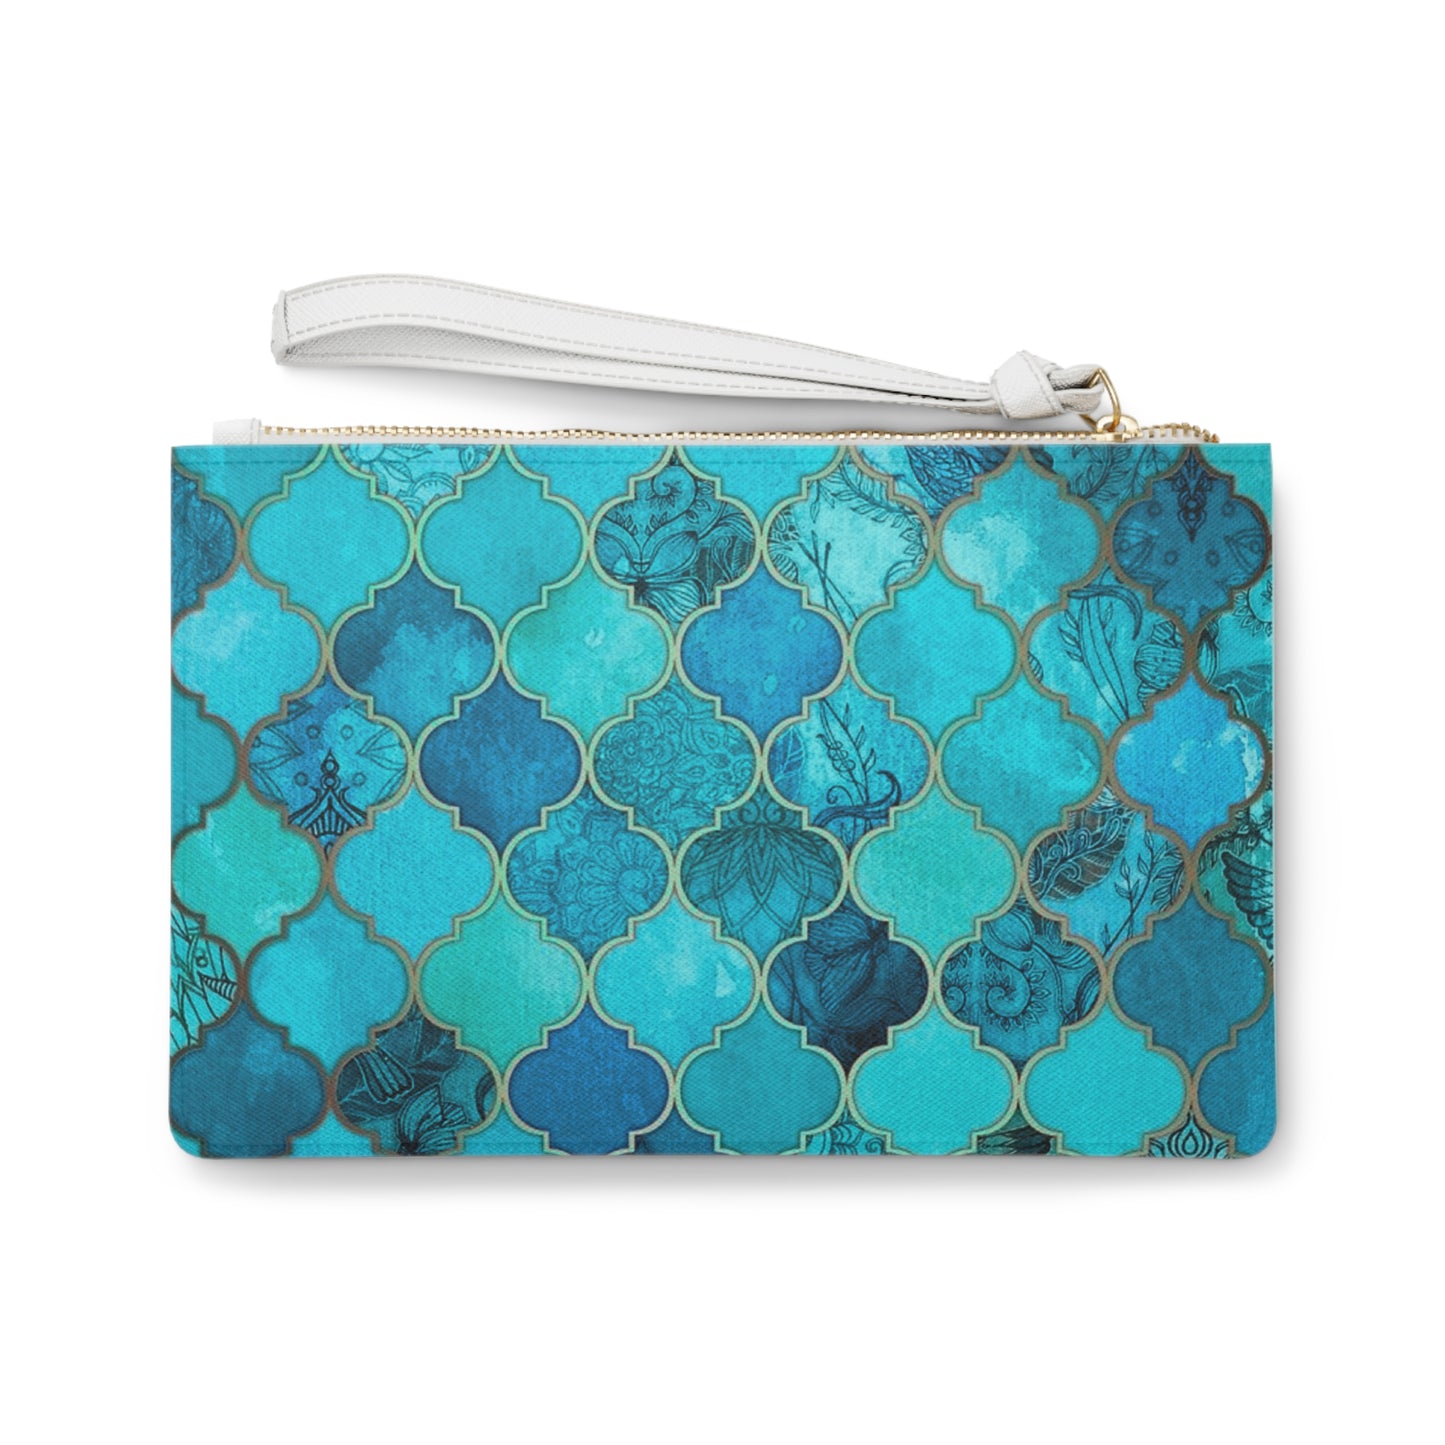 Teal and Turquoise Arabesque Tile Marrakech Moroccan Errands Evening Pouch Clutch Bag